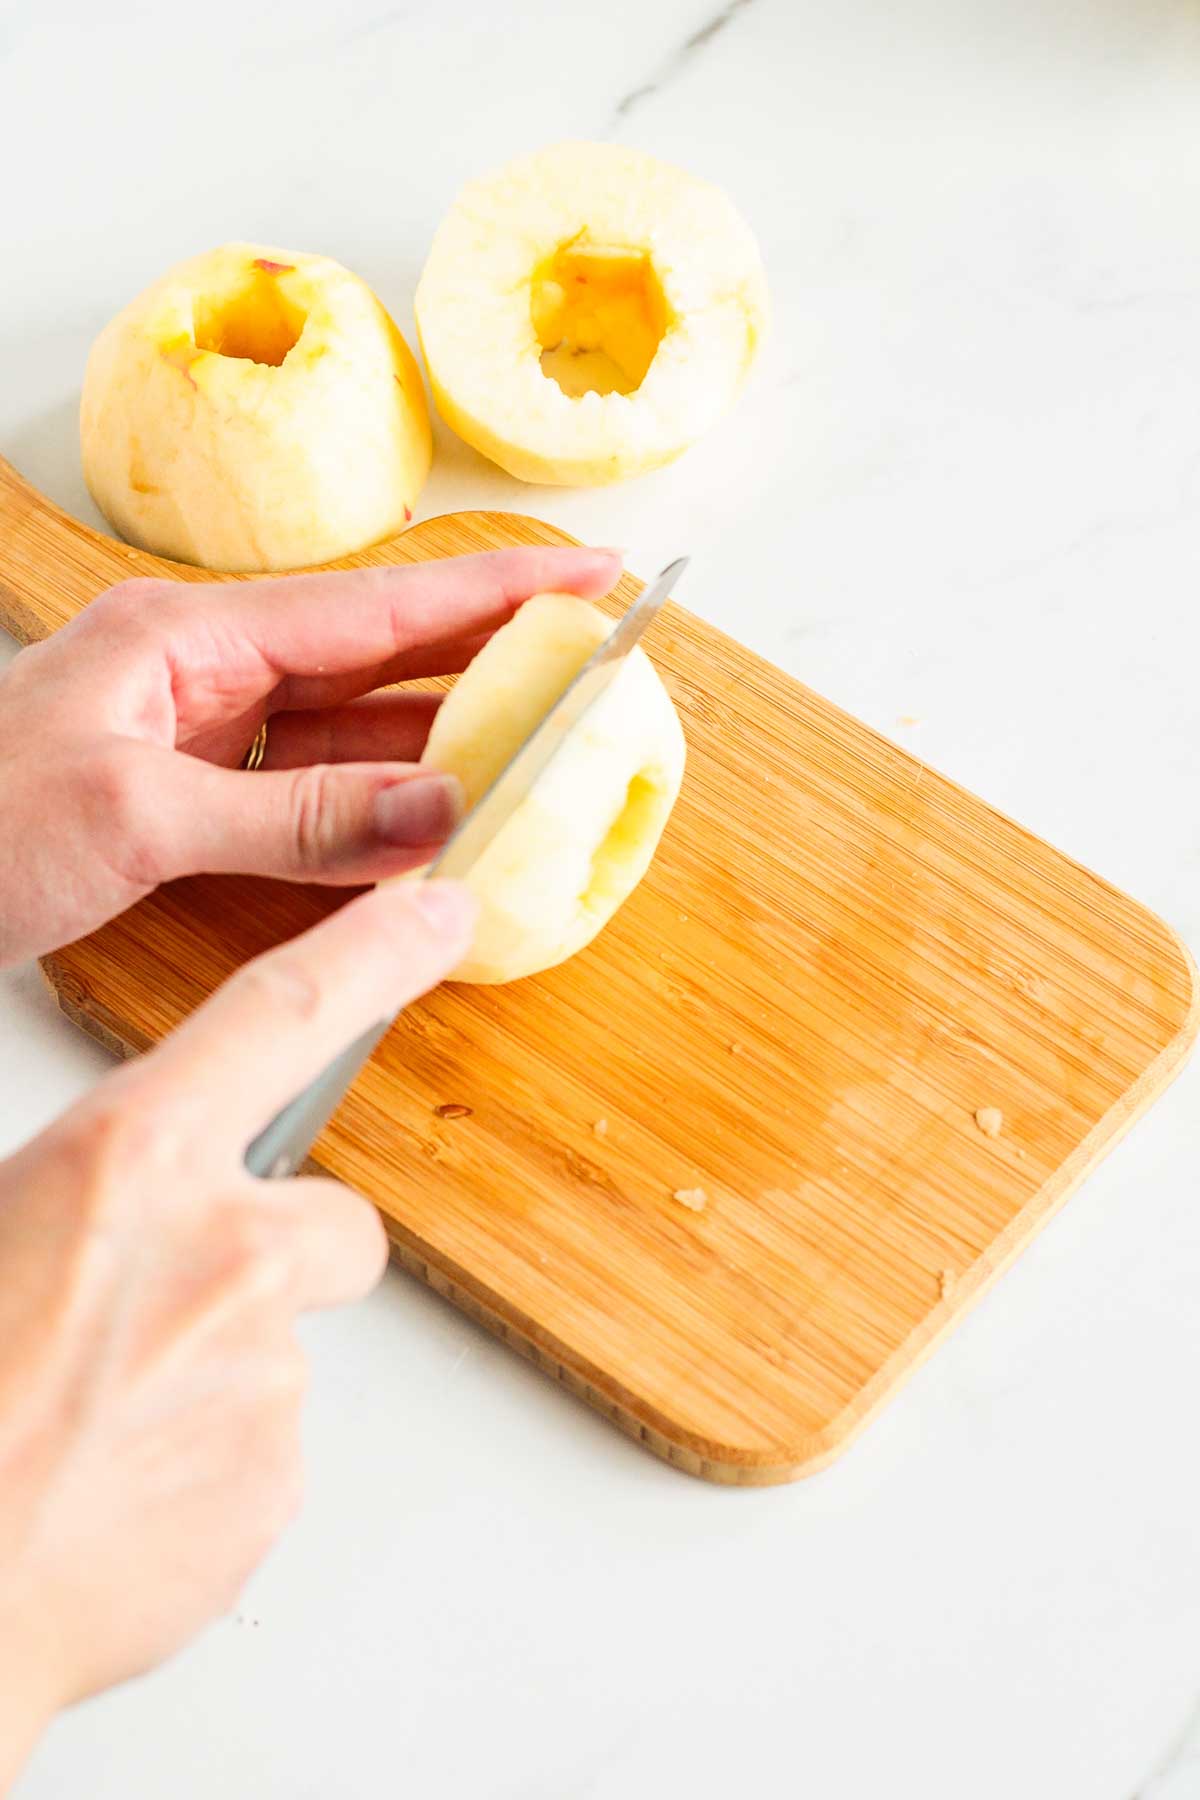 A cored apple being sliced to make apple fritter rings.